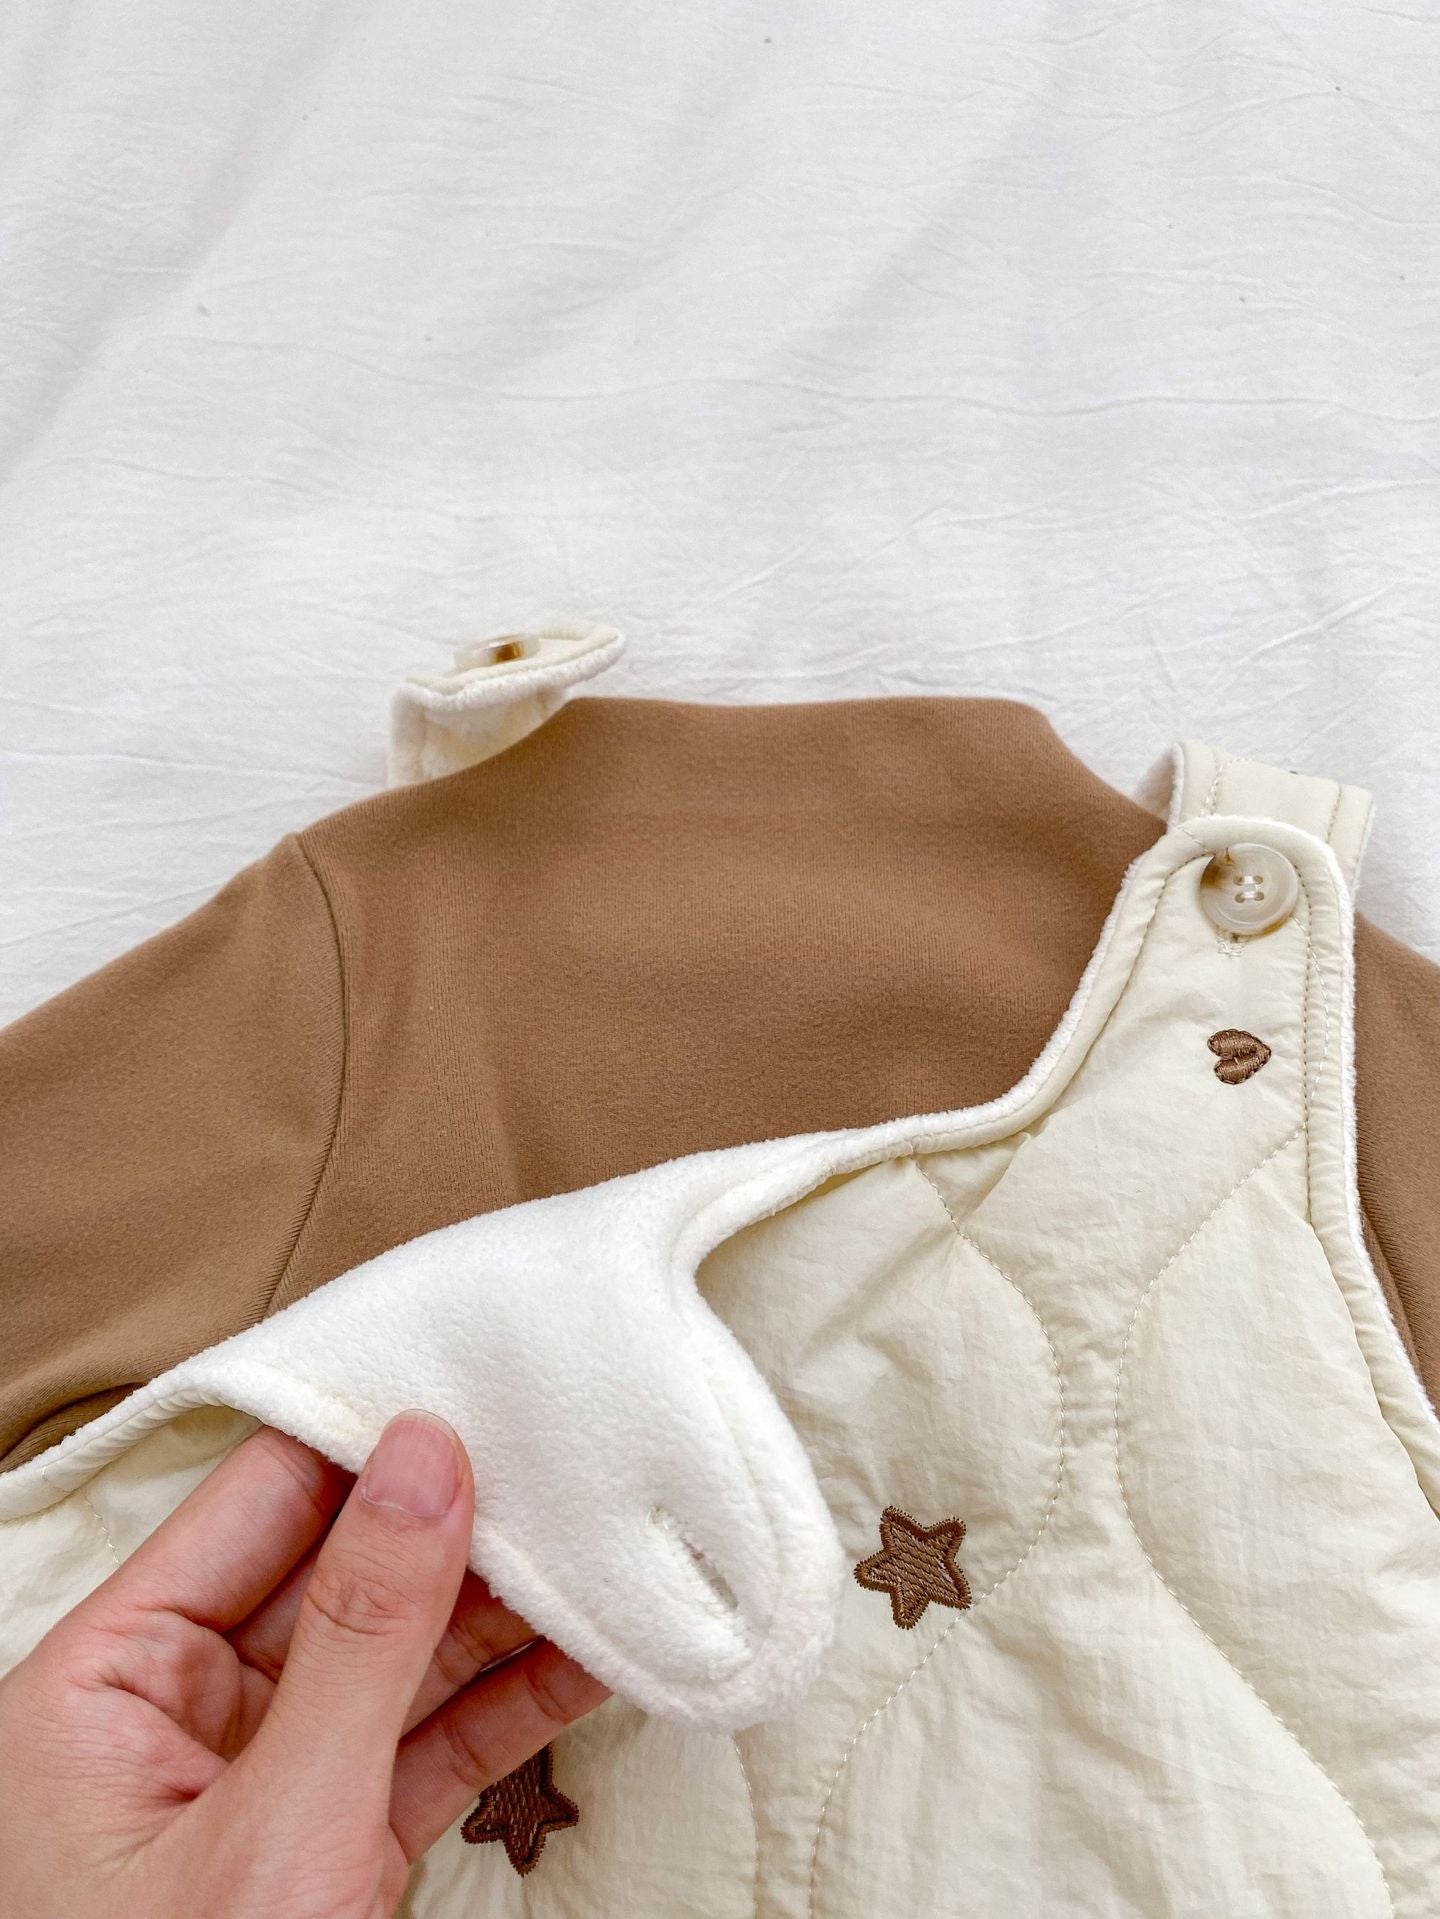 Infant Baby Star Embroidery Design Soft Cotton Fashion Overalls